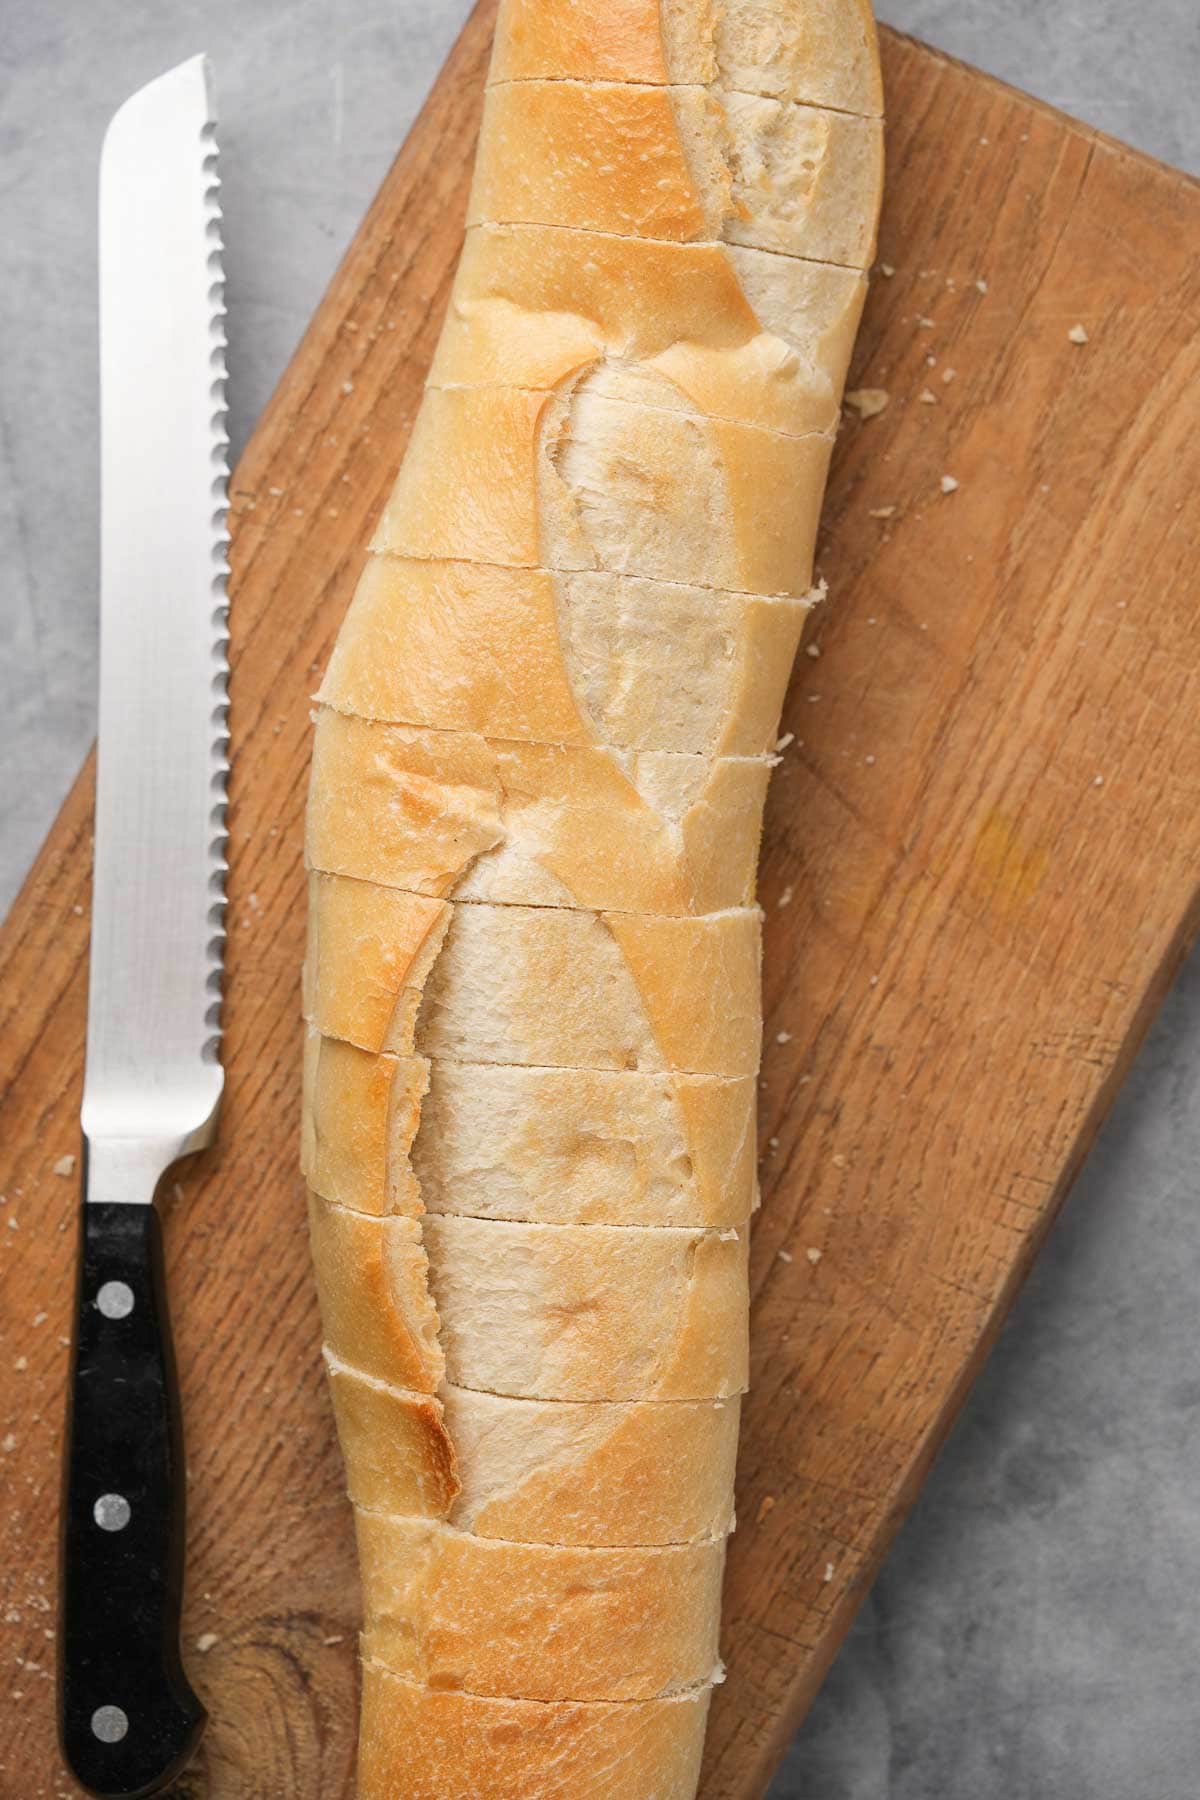 A loaf of bread on a cutting board with a knife.